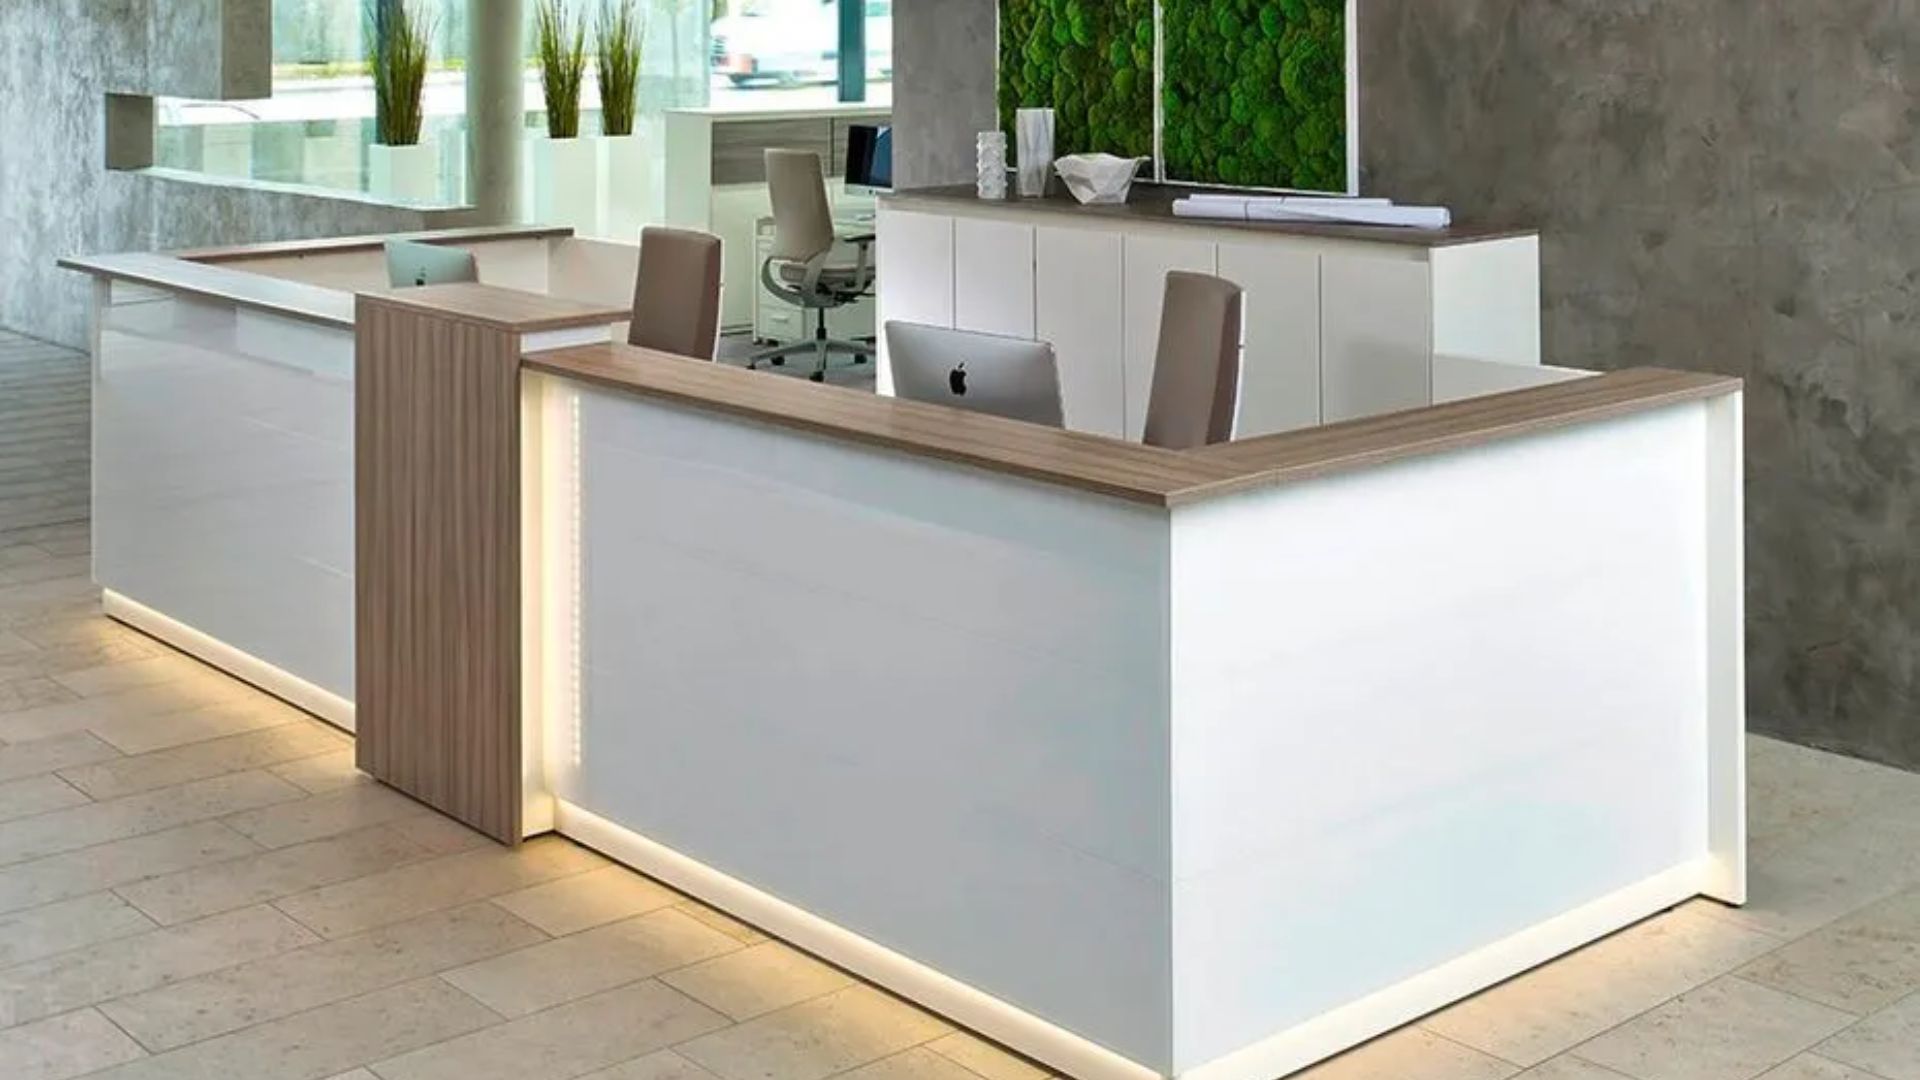 How Reception Desks Can Help Your Business in Dubai